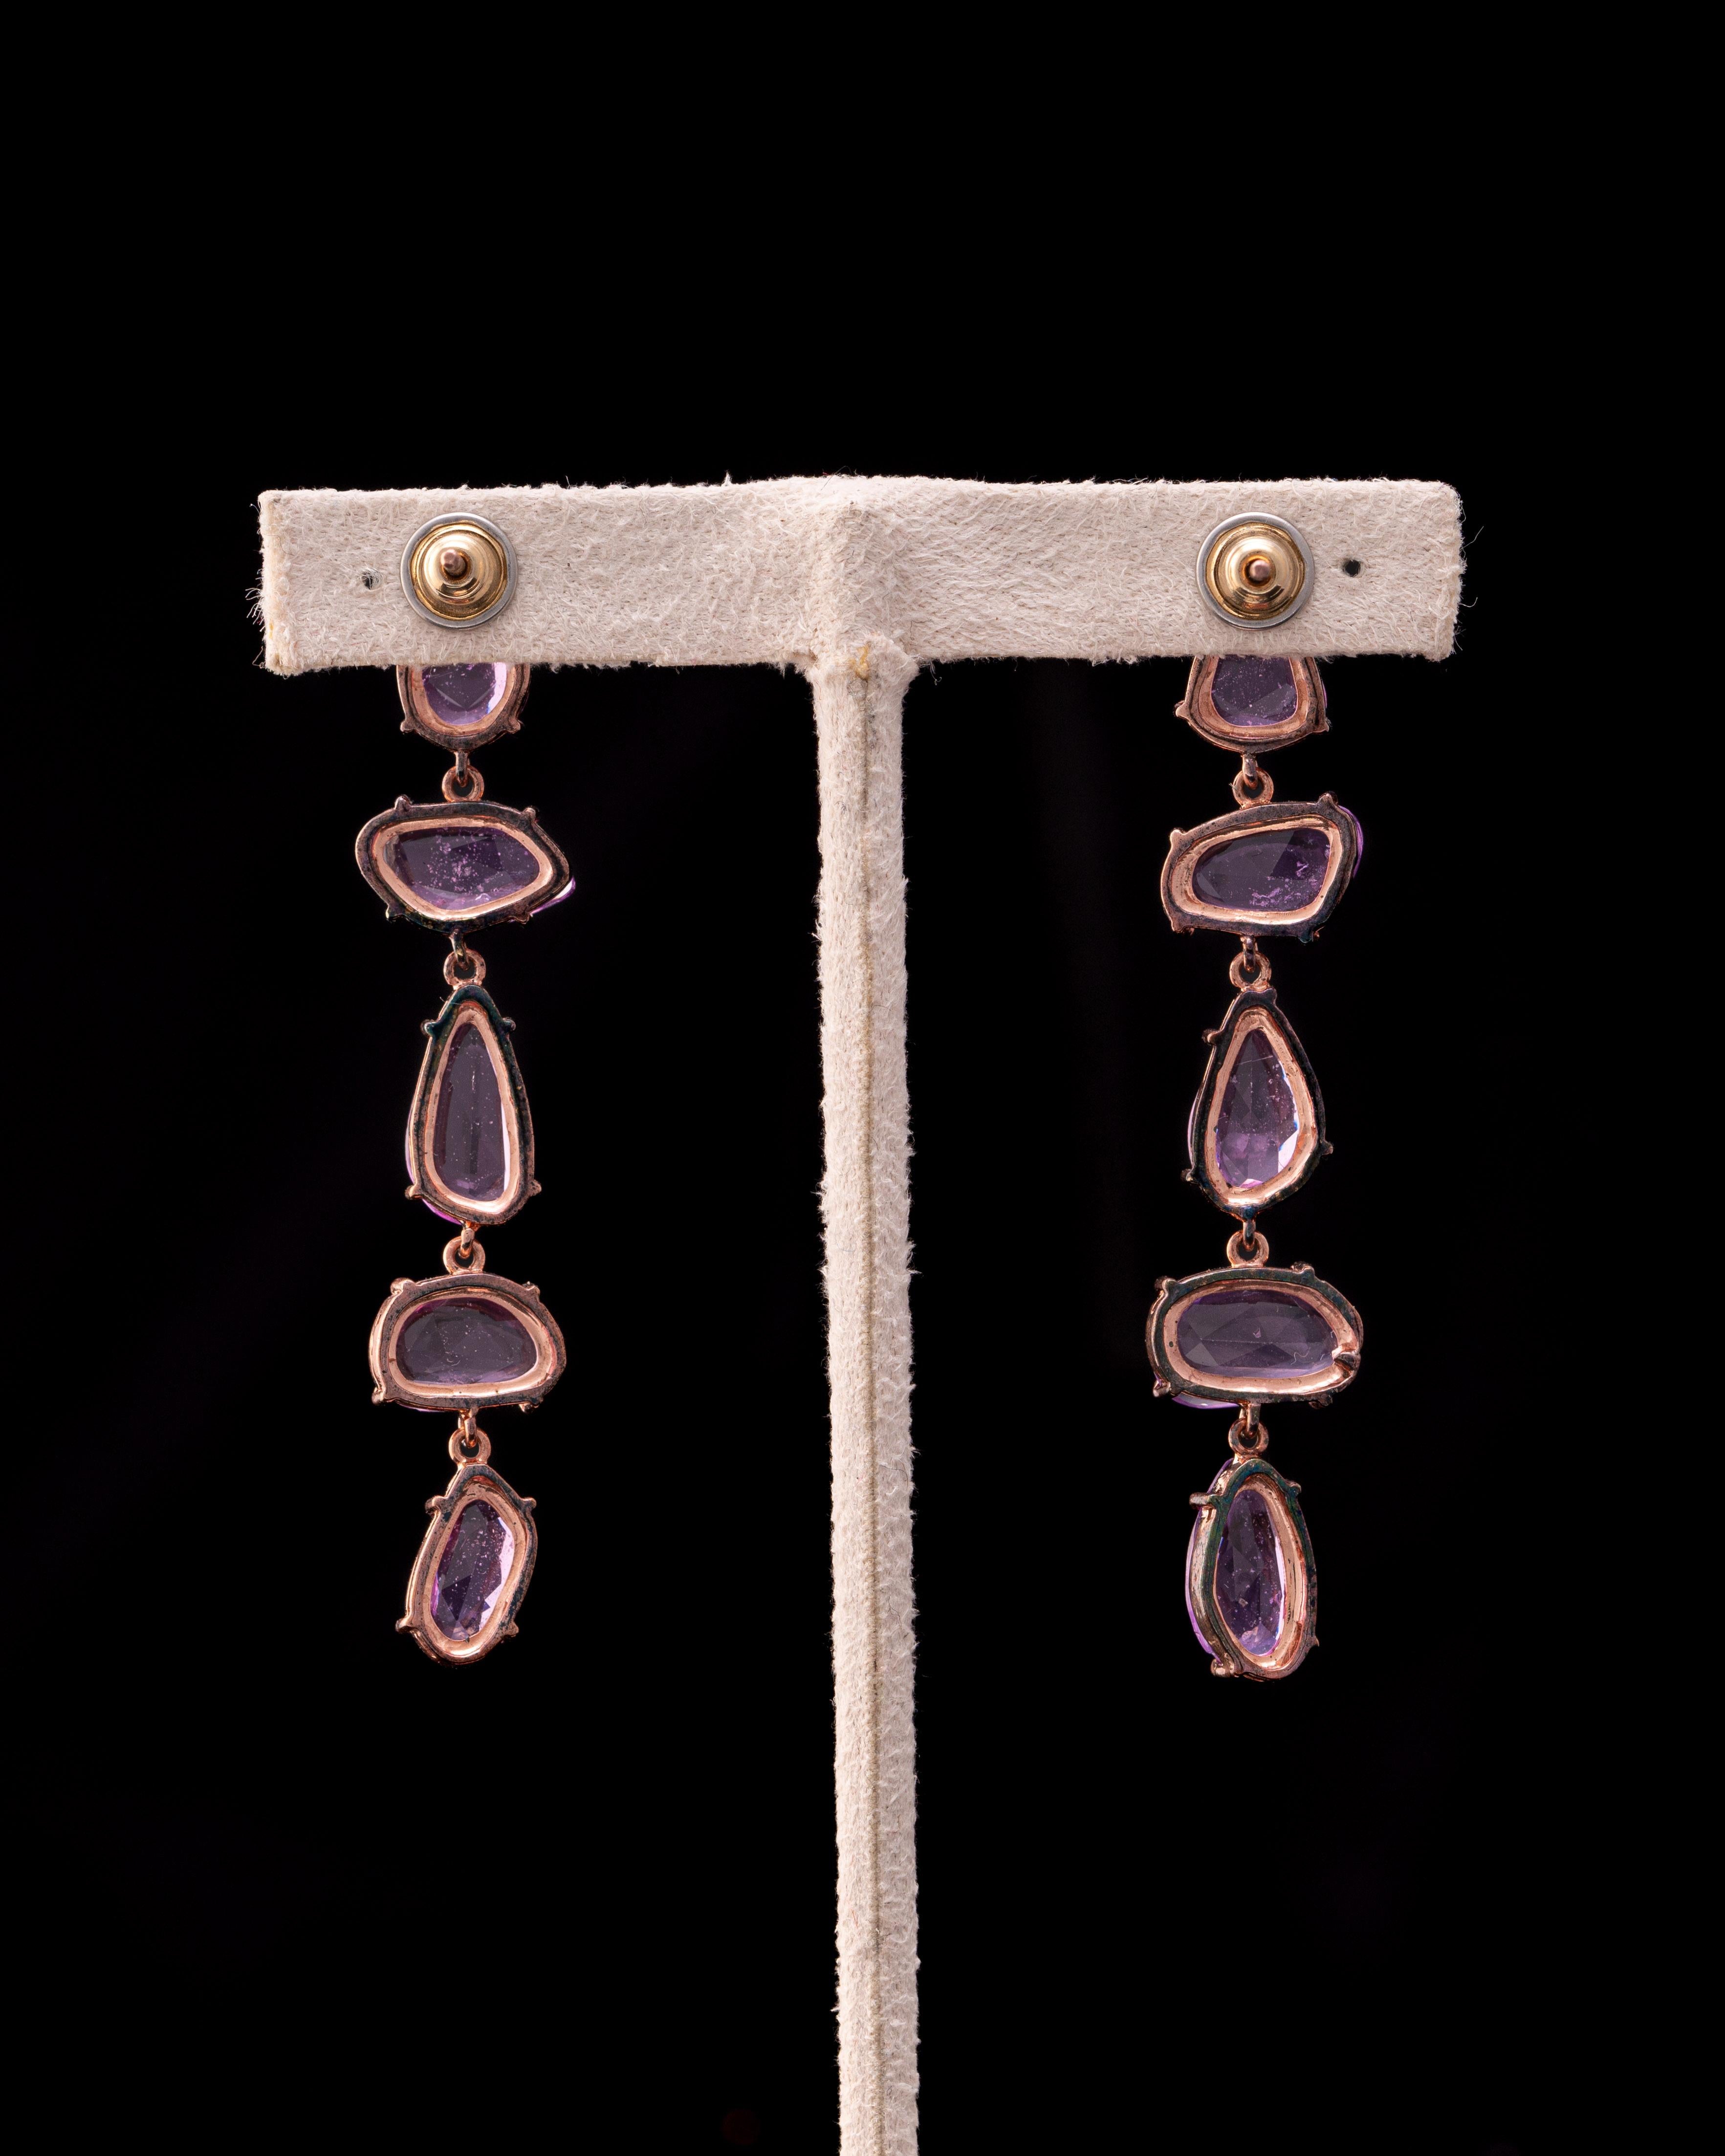 Certified 12 Carat Pink Sapphire Rose Cut Drop Earrings Set in Pink Gold In New Condition For Sale In Bangkok, Thailand